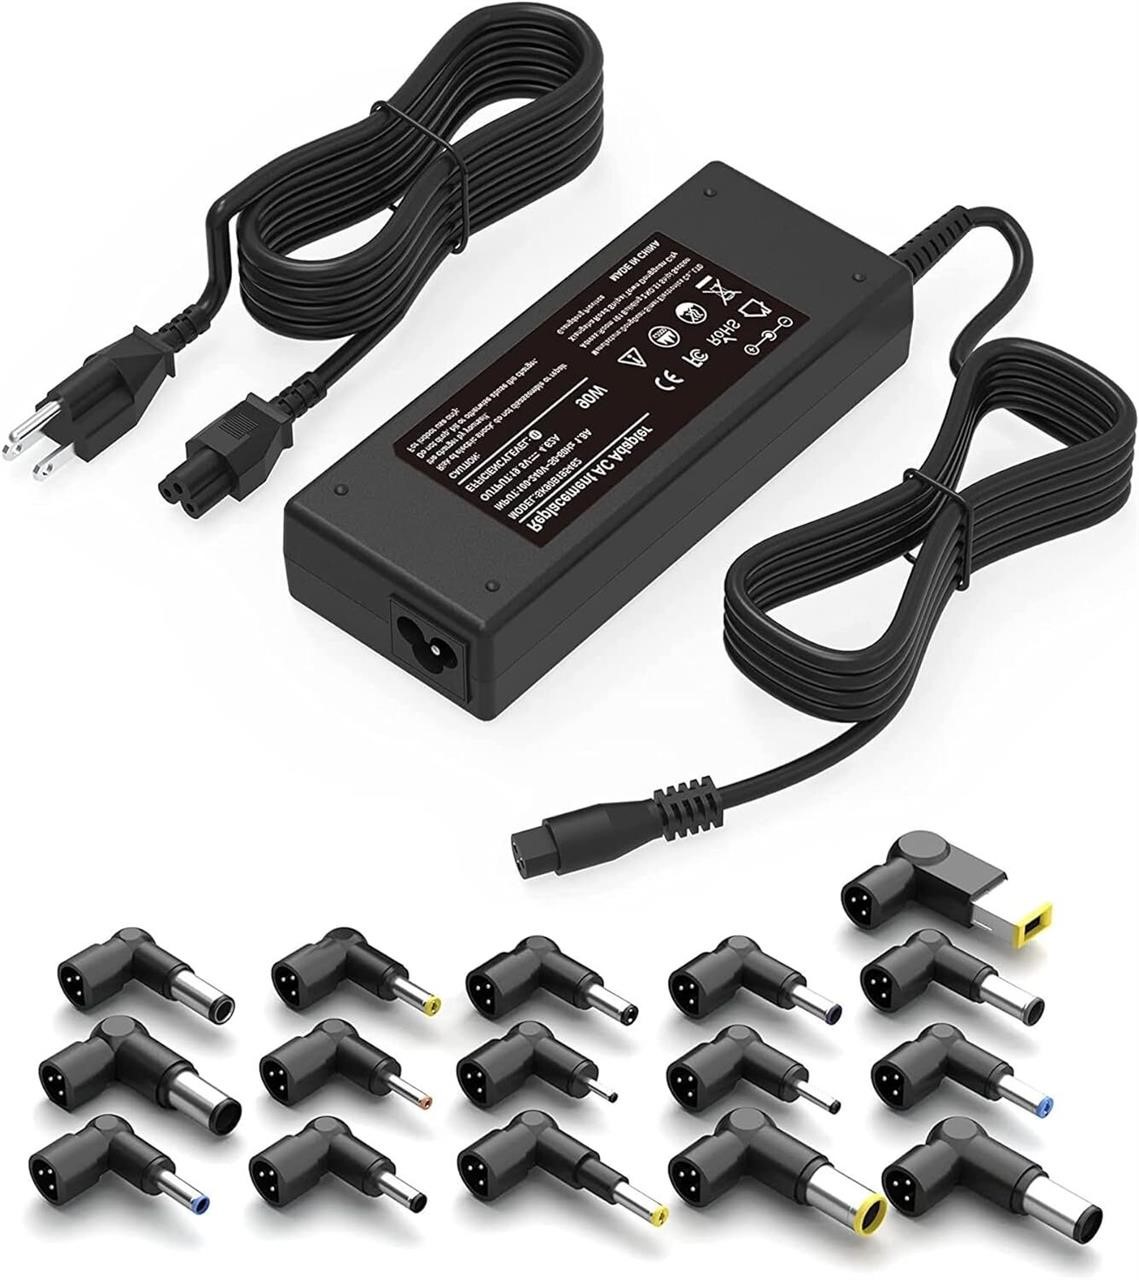 90W Universal AC Adapter for Multiple Brands